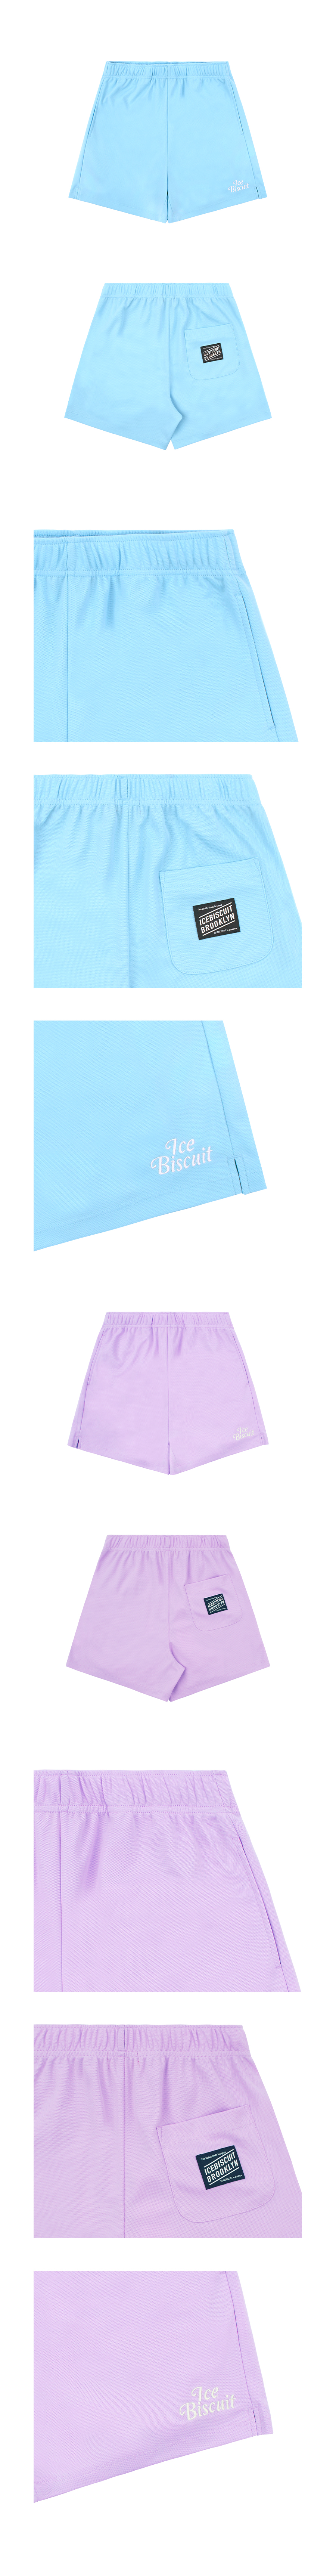 Icebiscuit letter girl pique shorts 상세 이미지